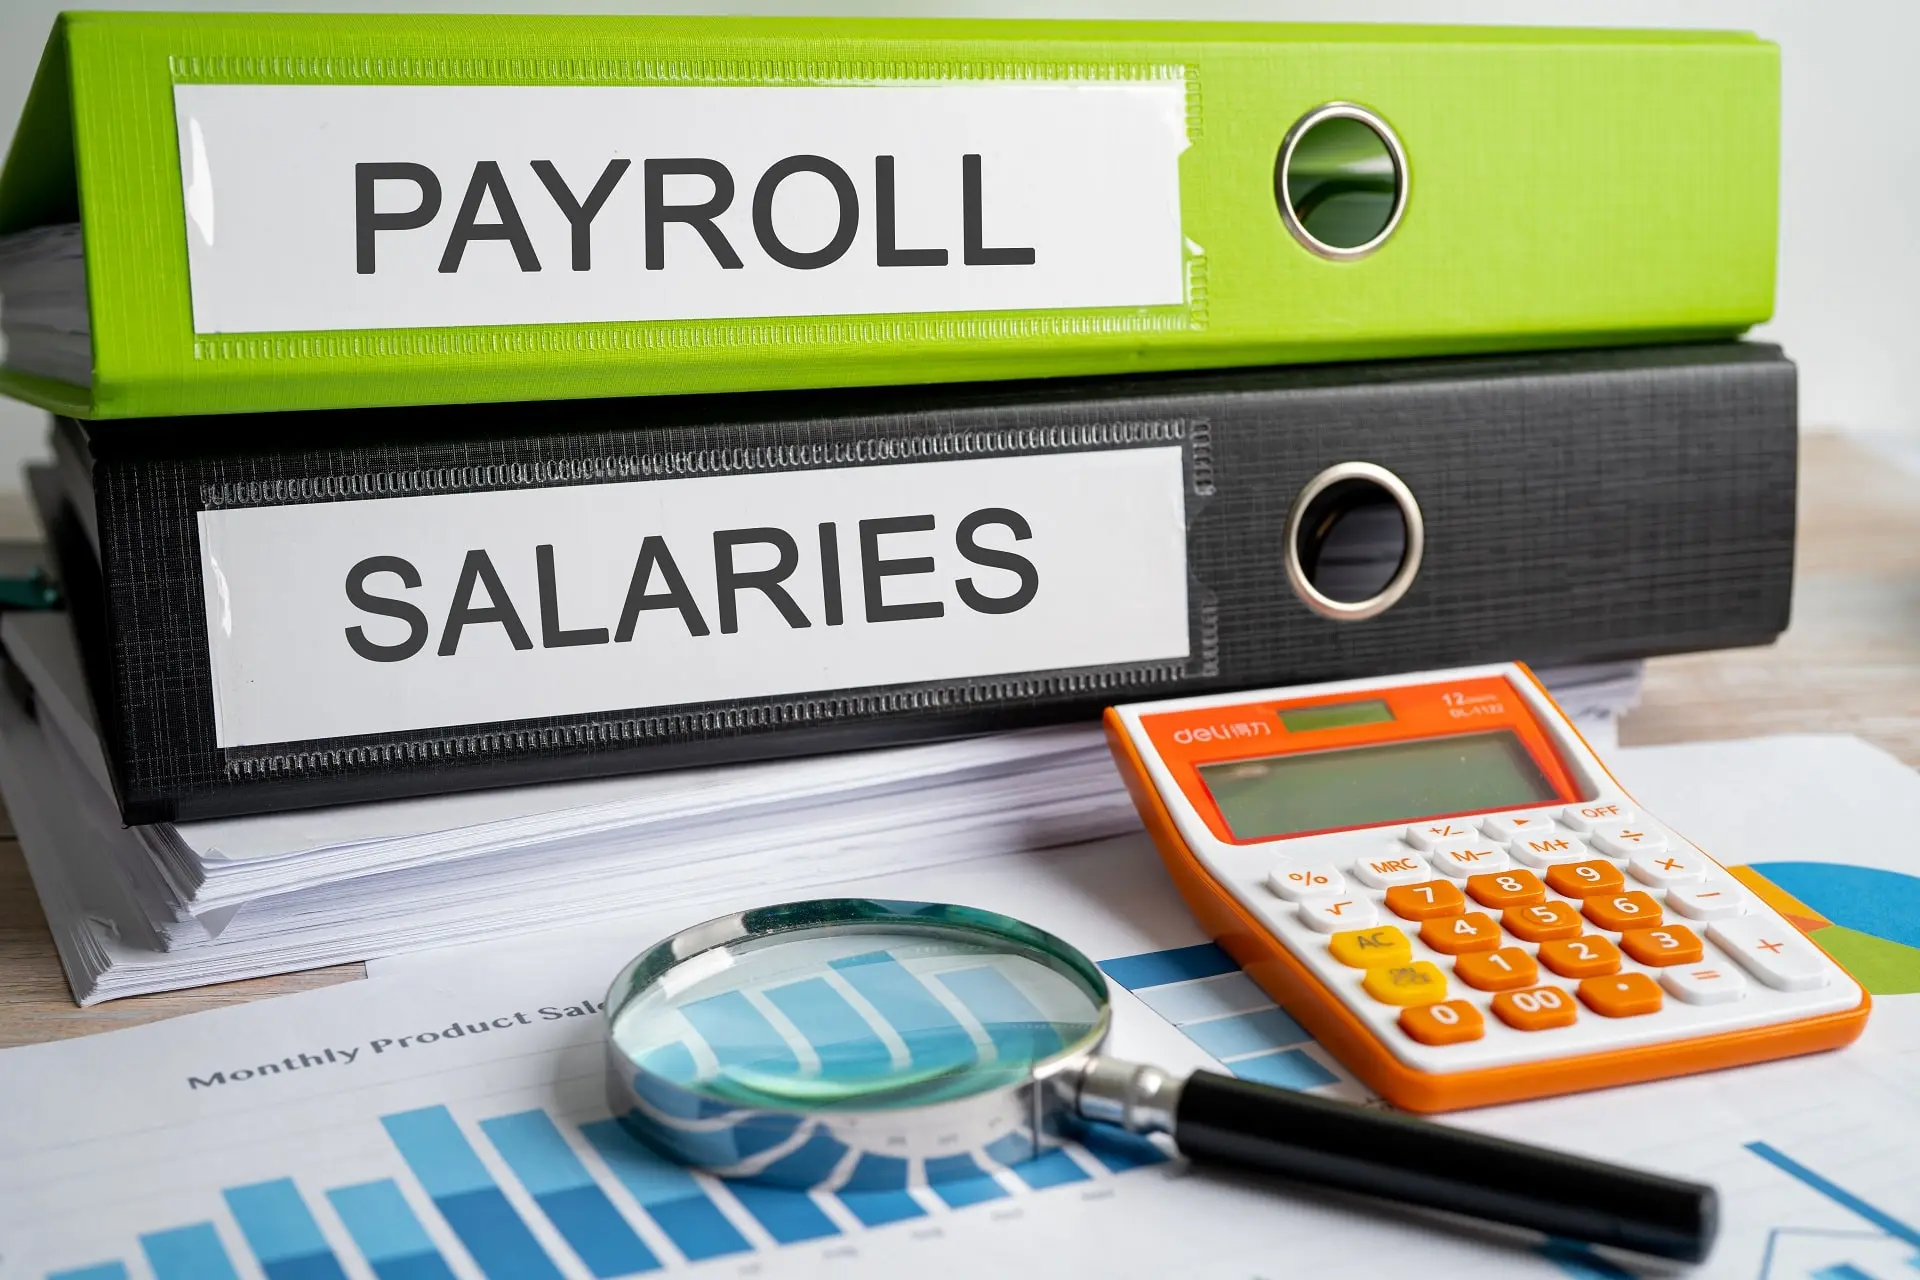 What Are the Benefits of Using Payroll Services?